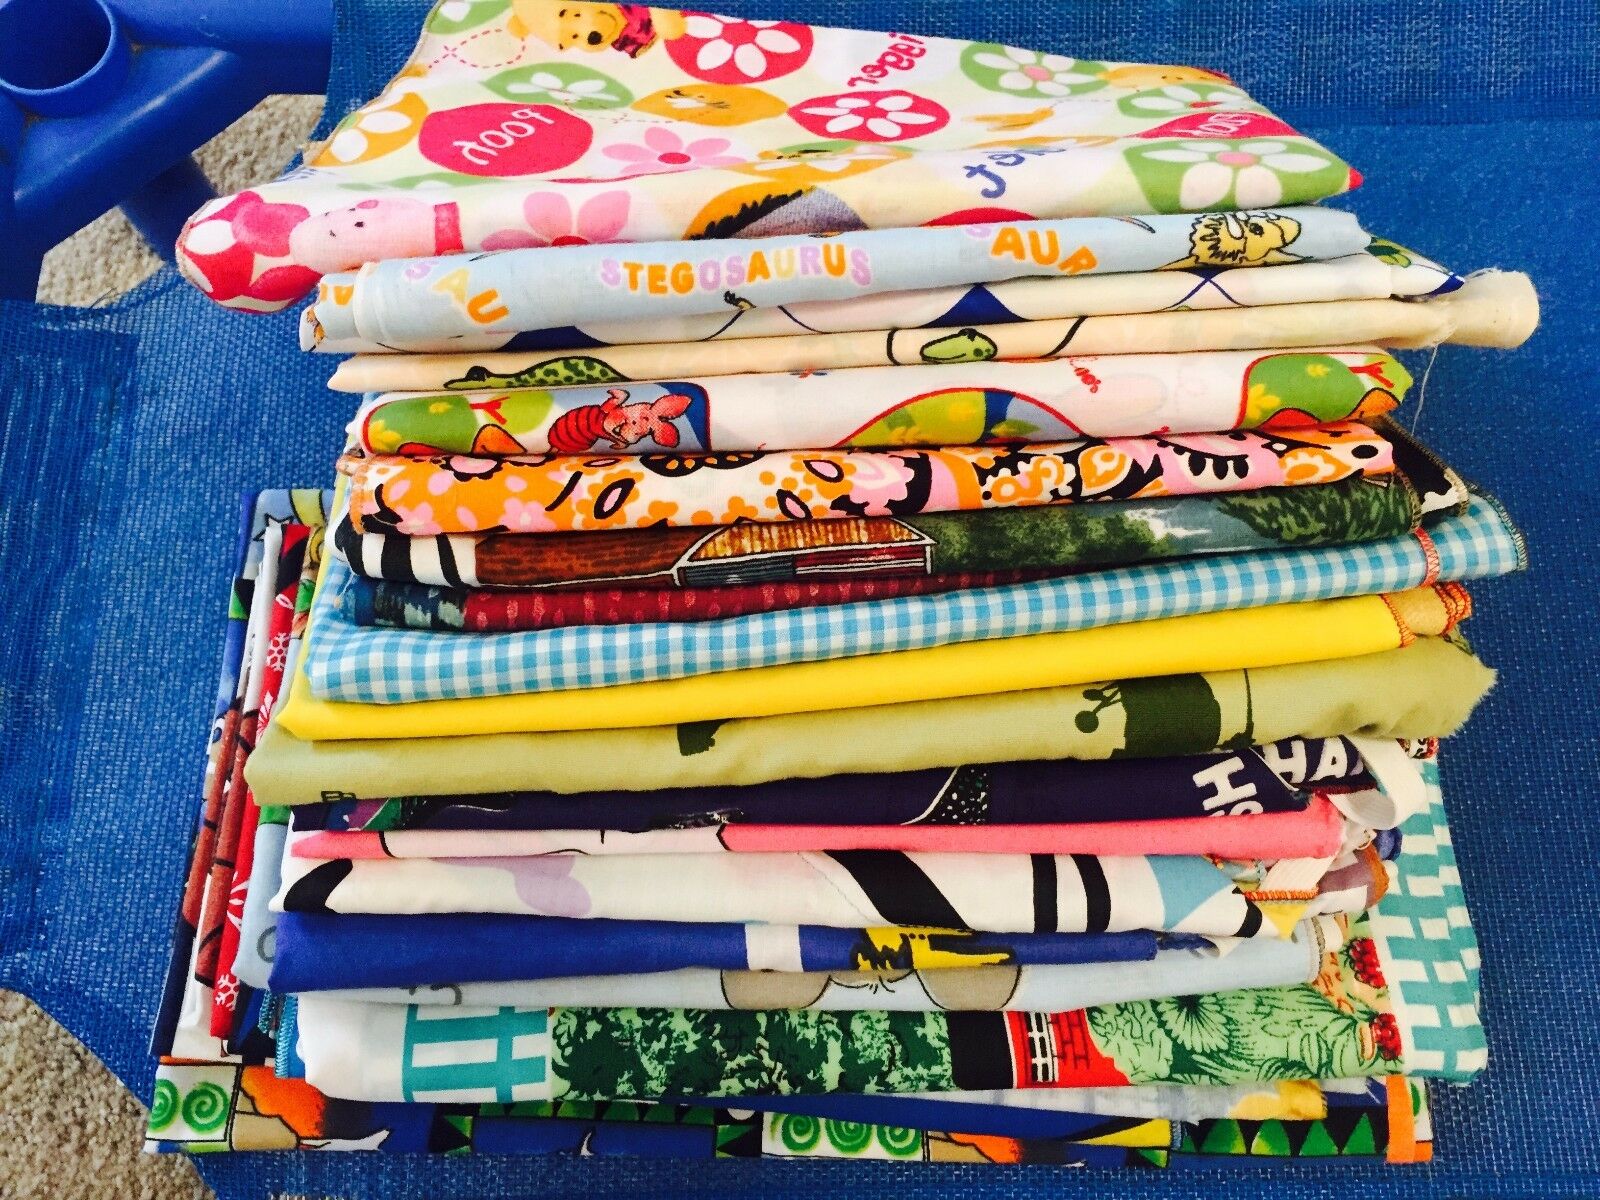 15 Printed Daycare Cot Sheets Standard Size 52x22 Elastic All 4 Sides!!